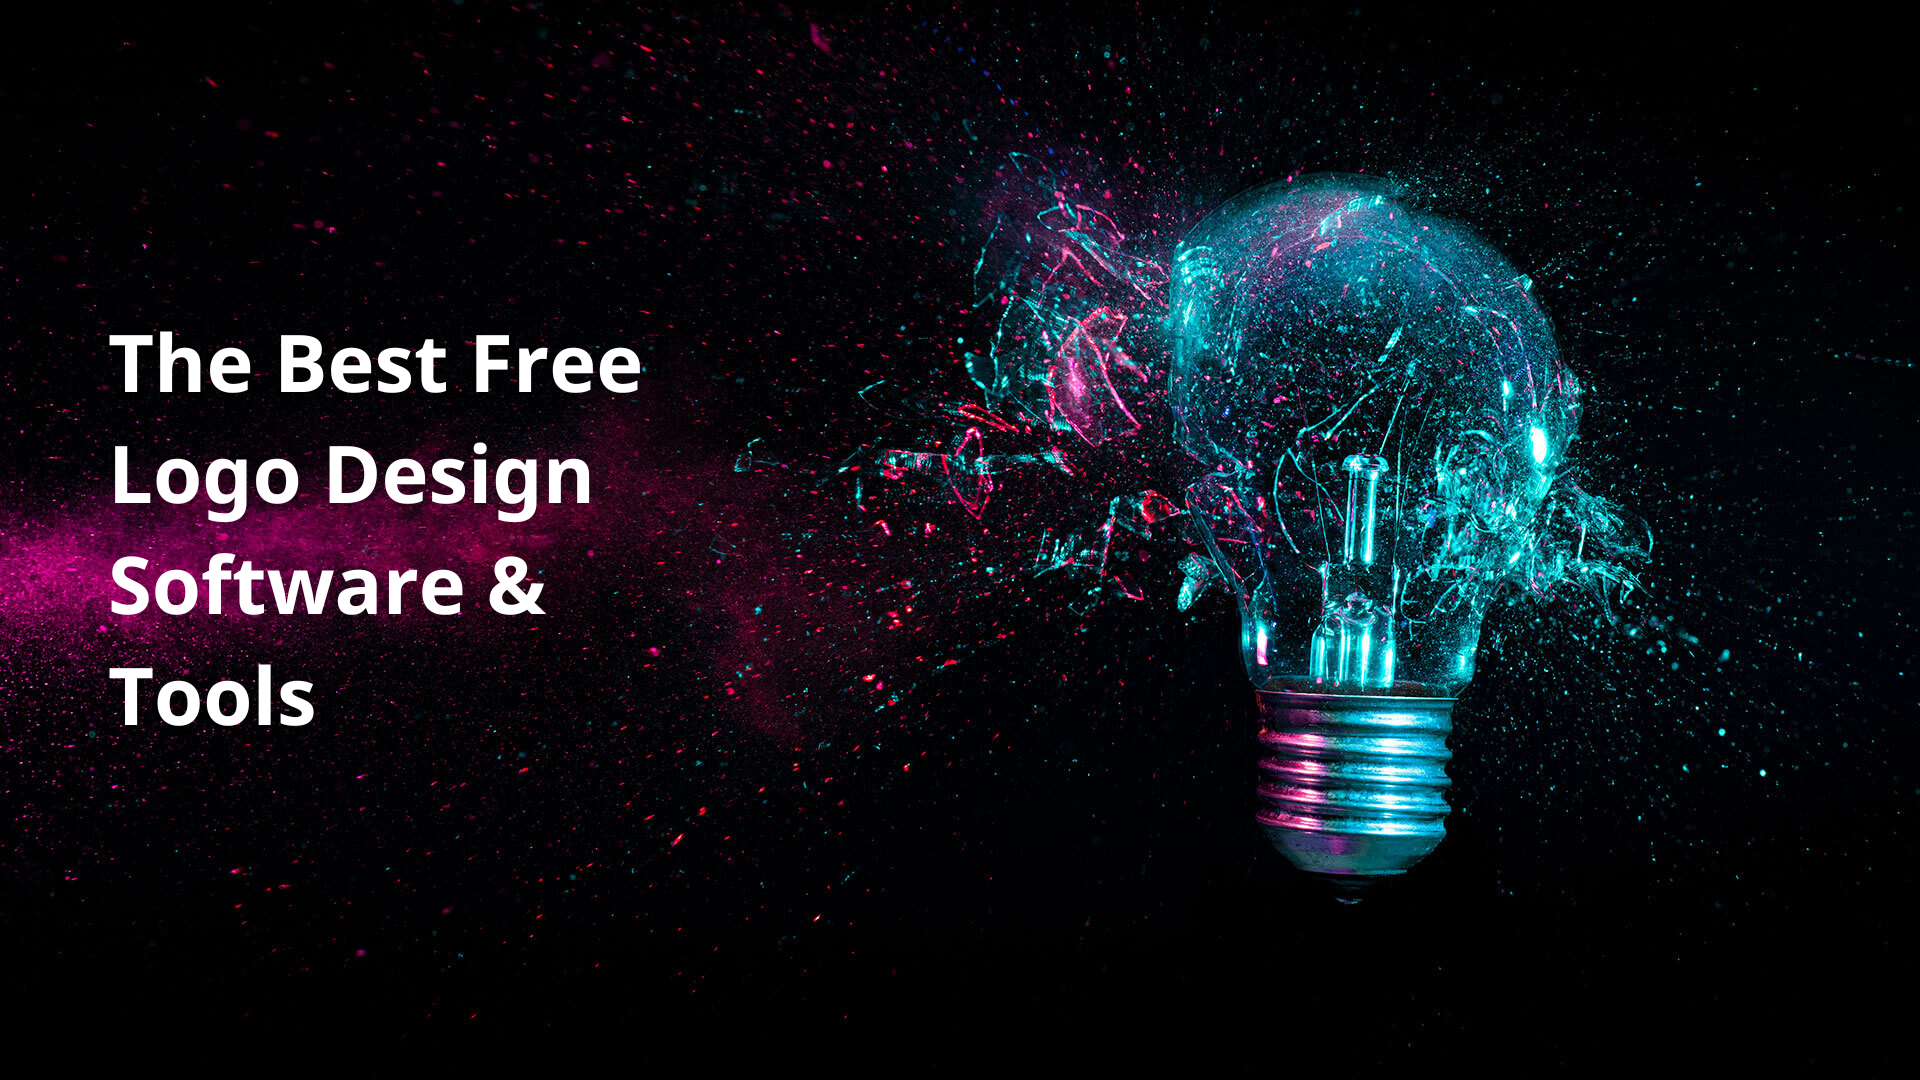 Top 10 free logo designs tools and software